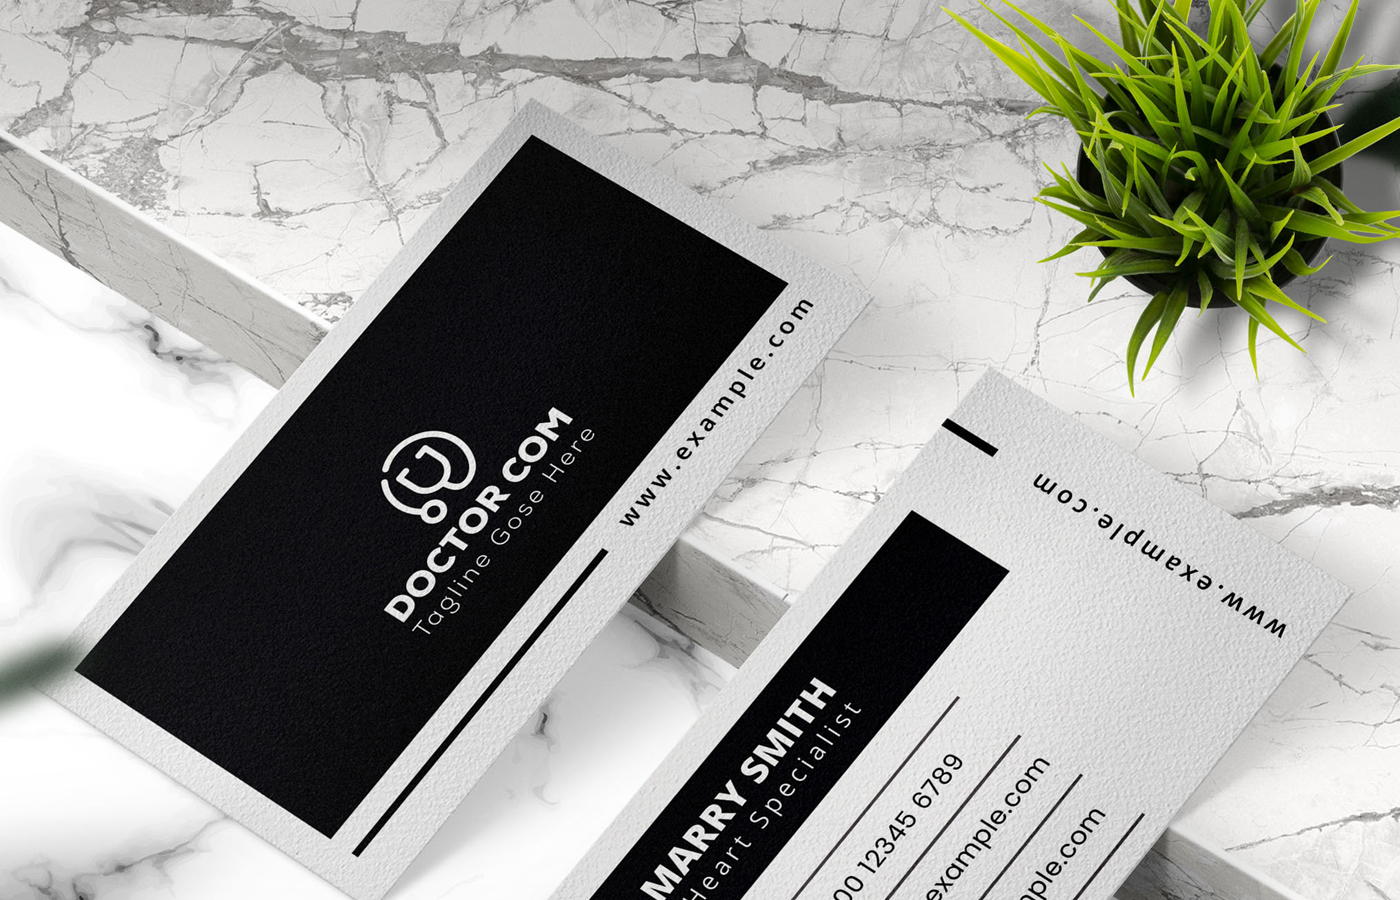 Black and White Business Card Template